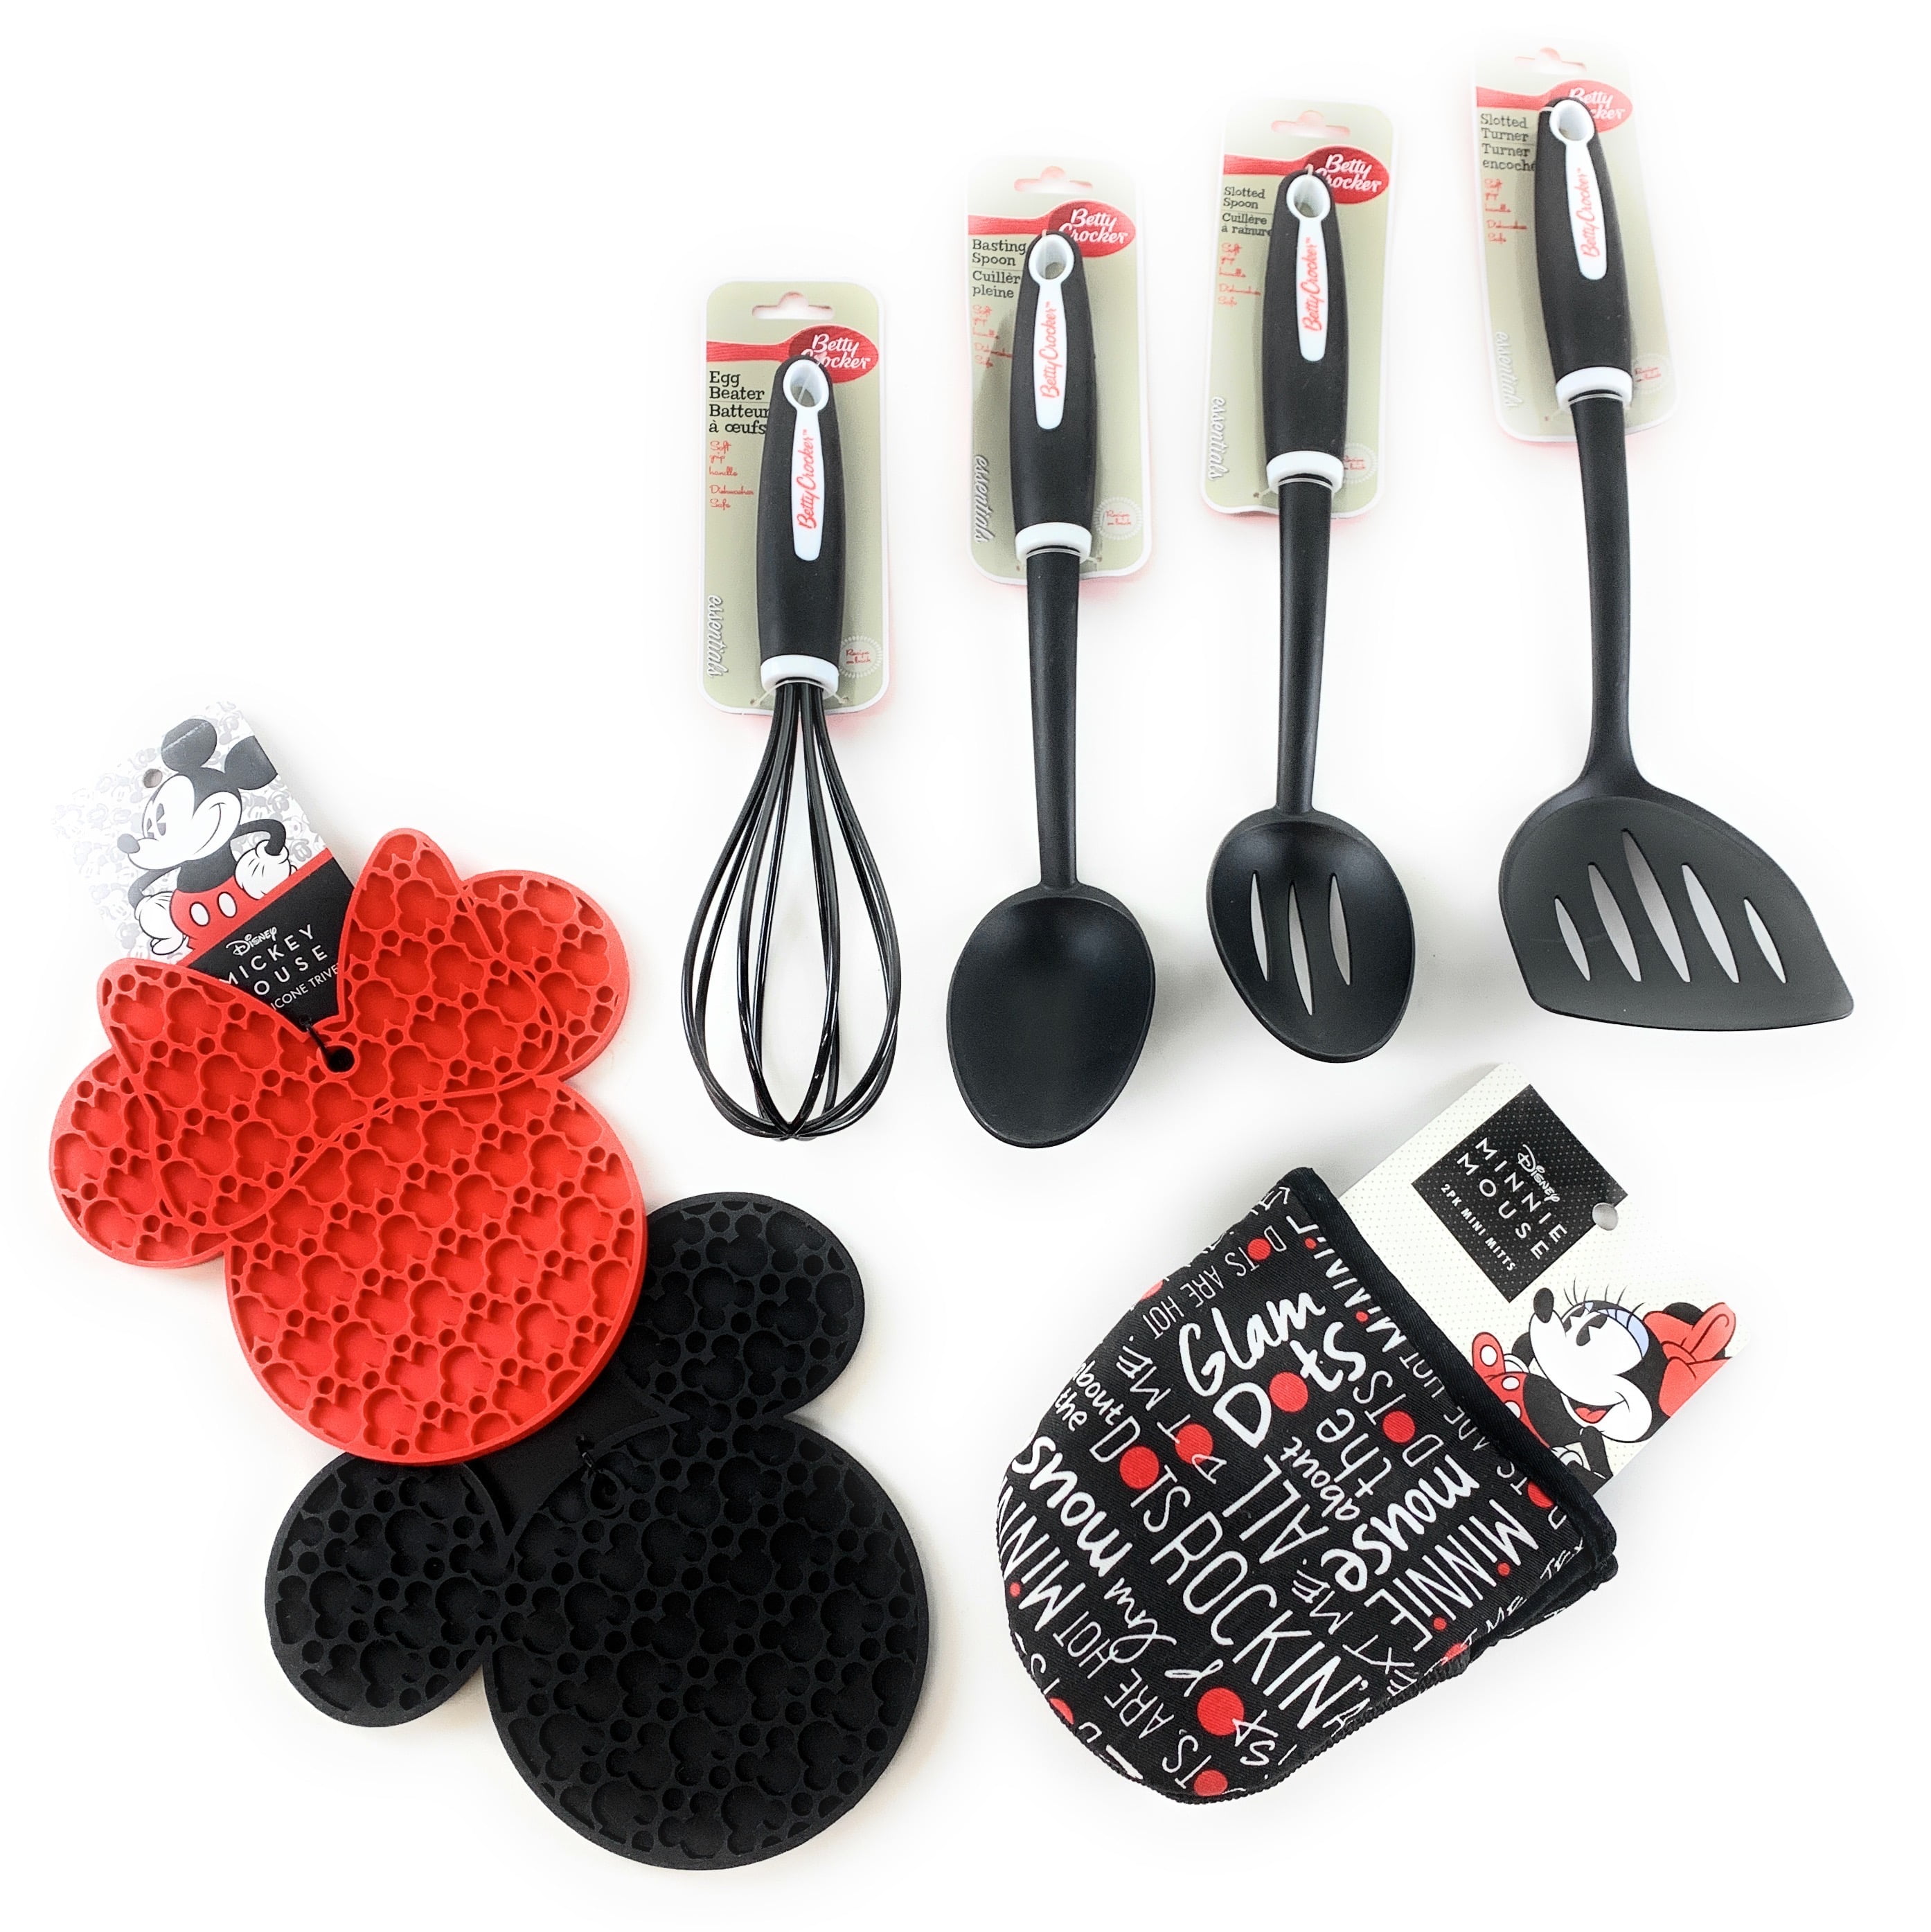 Disney Kitchen Gift Set! Silicon Trivets + Oven Mitts + Cooking